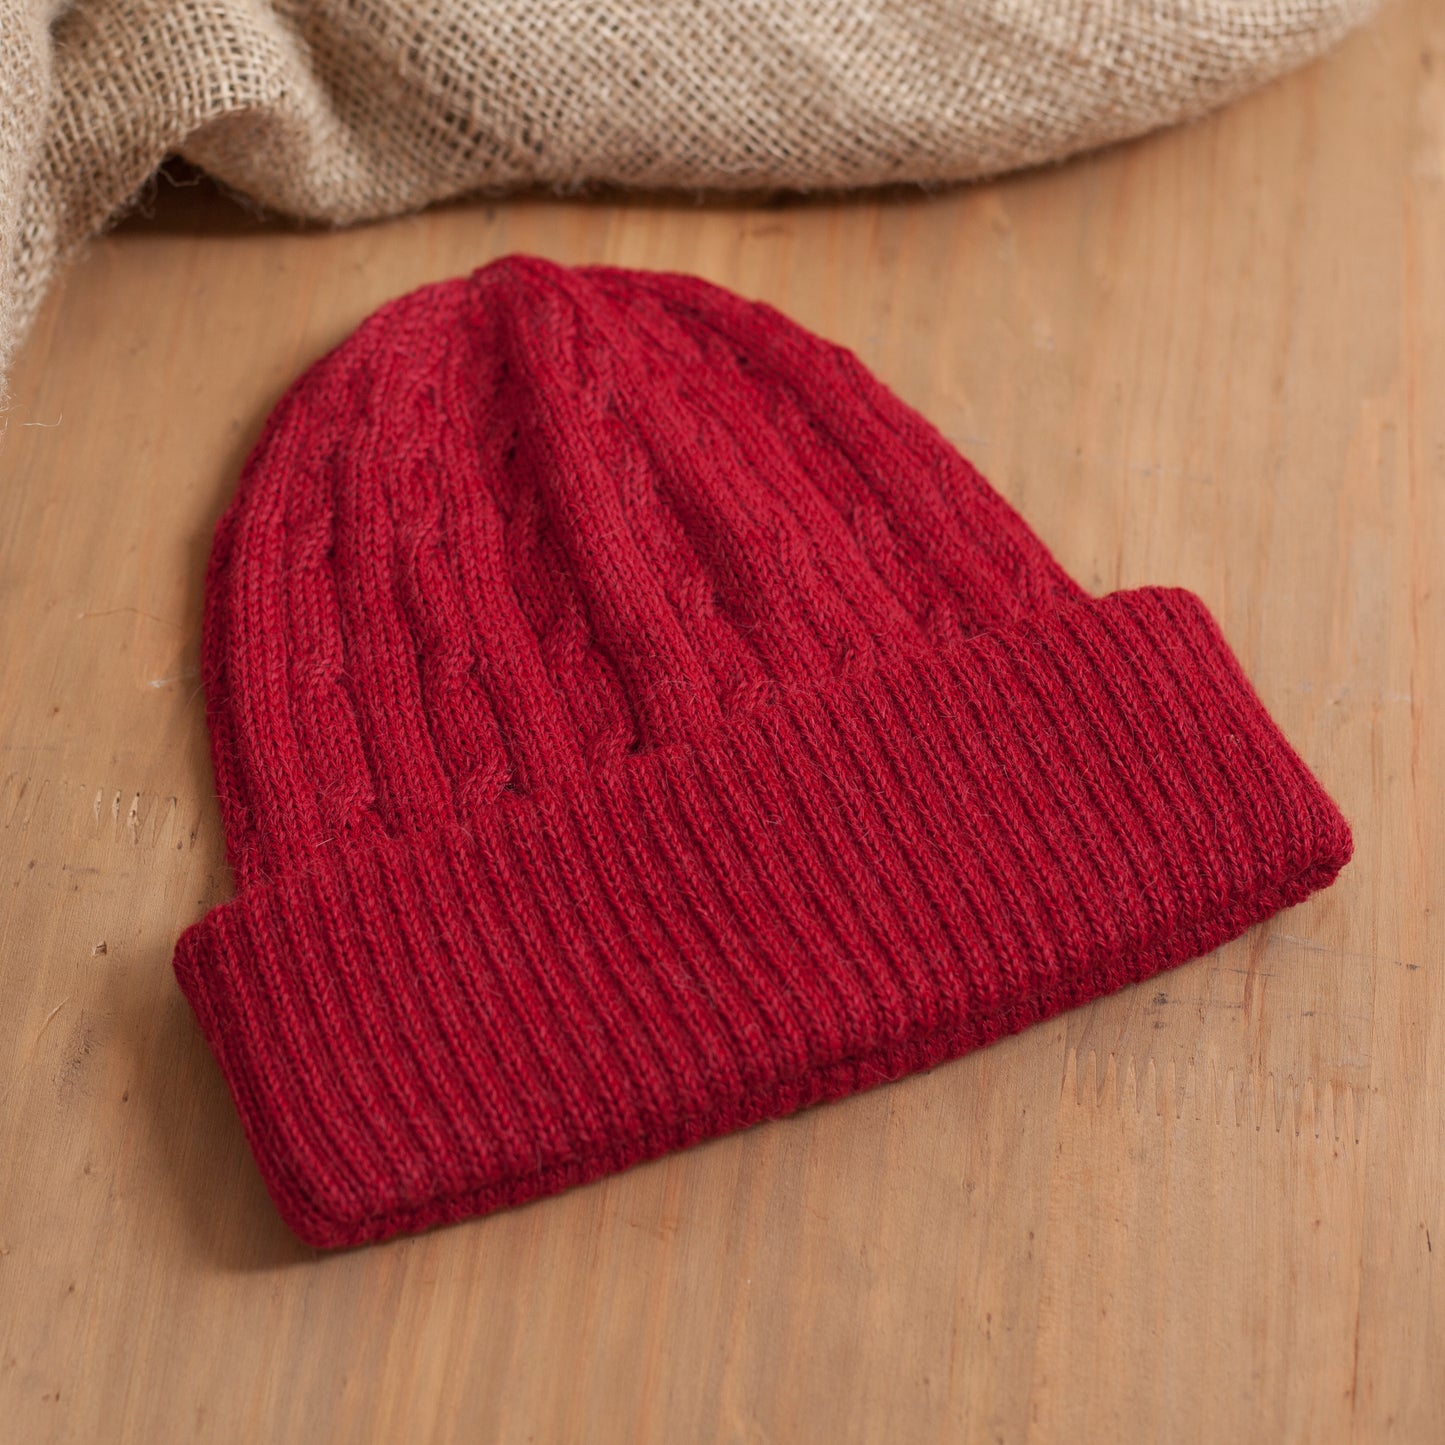 Comfy in Red Crimson Red 100% Alpaca Soft Cable Knit Hat from Peru